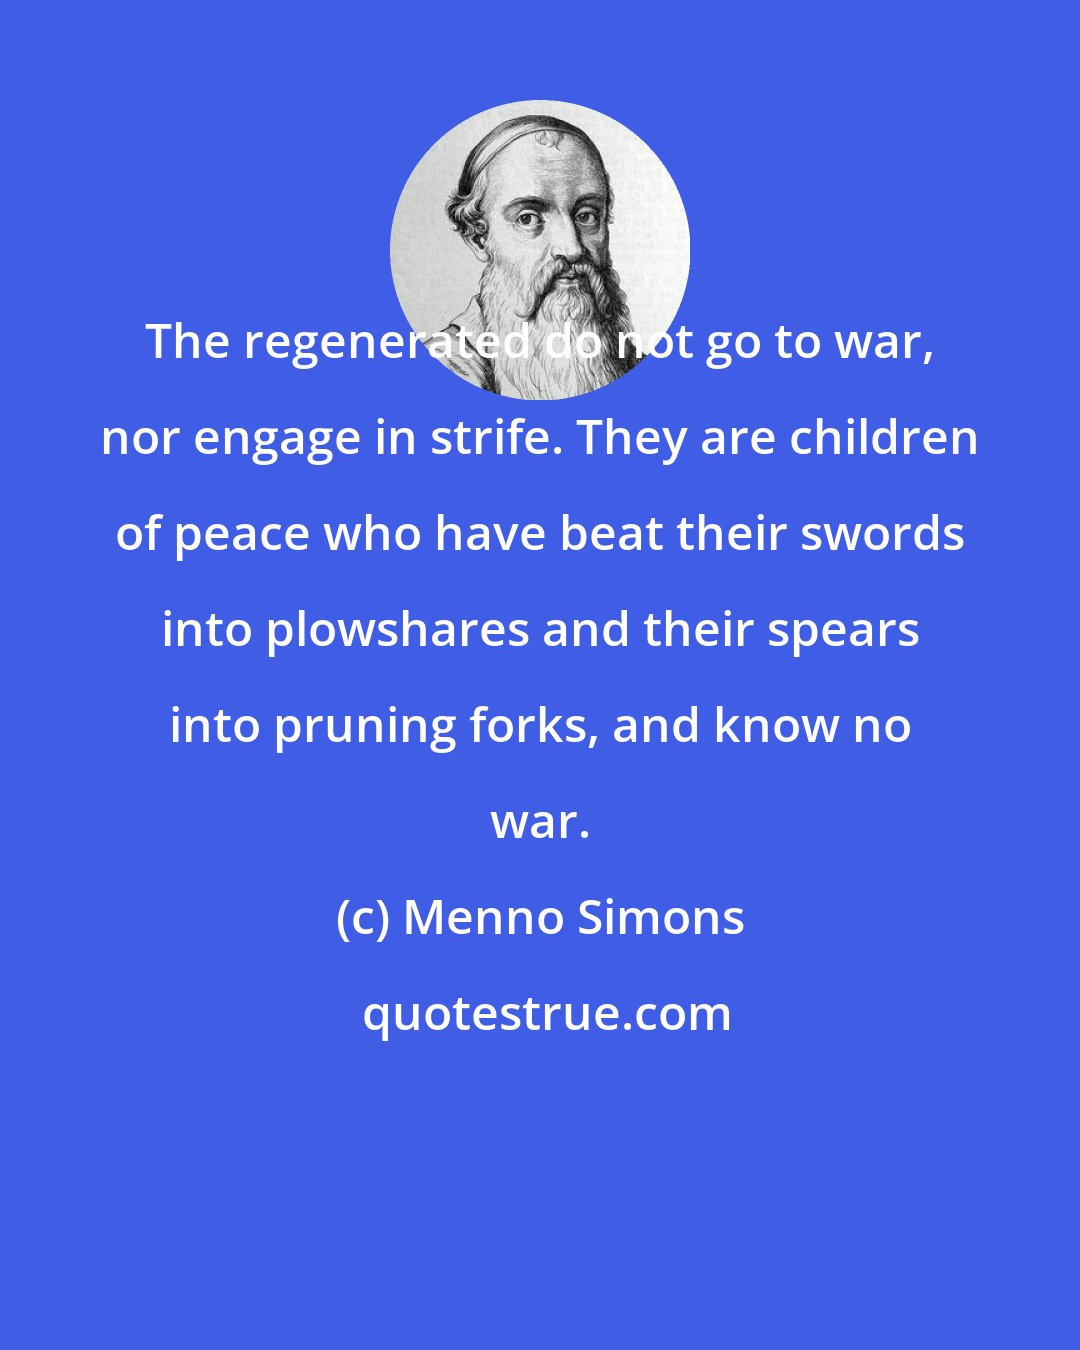 Menno Simons: The regenerated do not go to war, nor engage in strife. They are children of peace who have beat their swords into plowshares and their spears into pruning forks, and know no war.